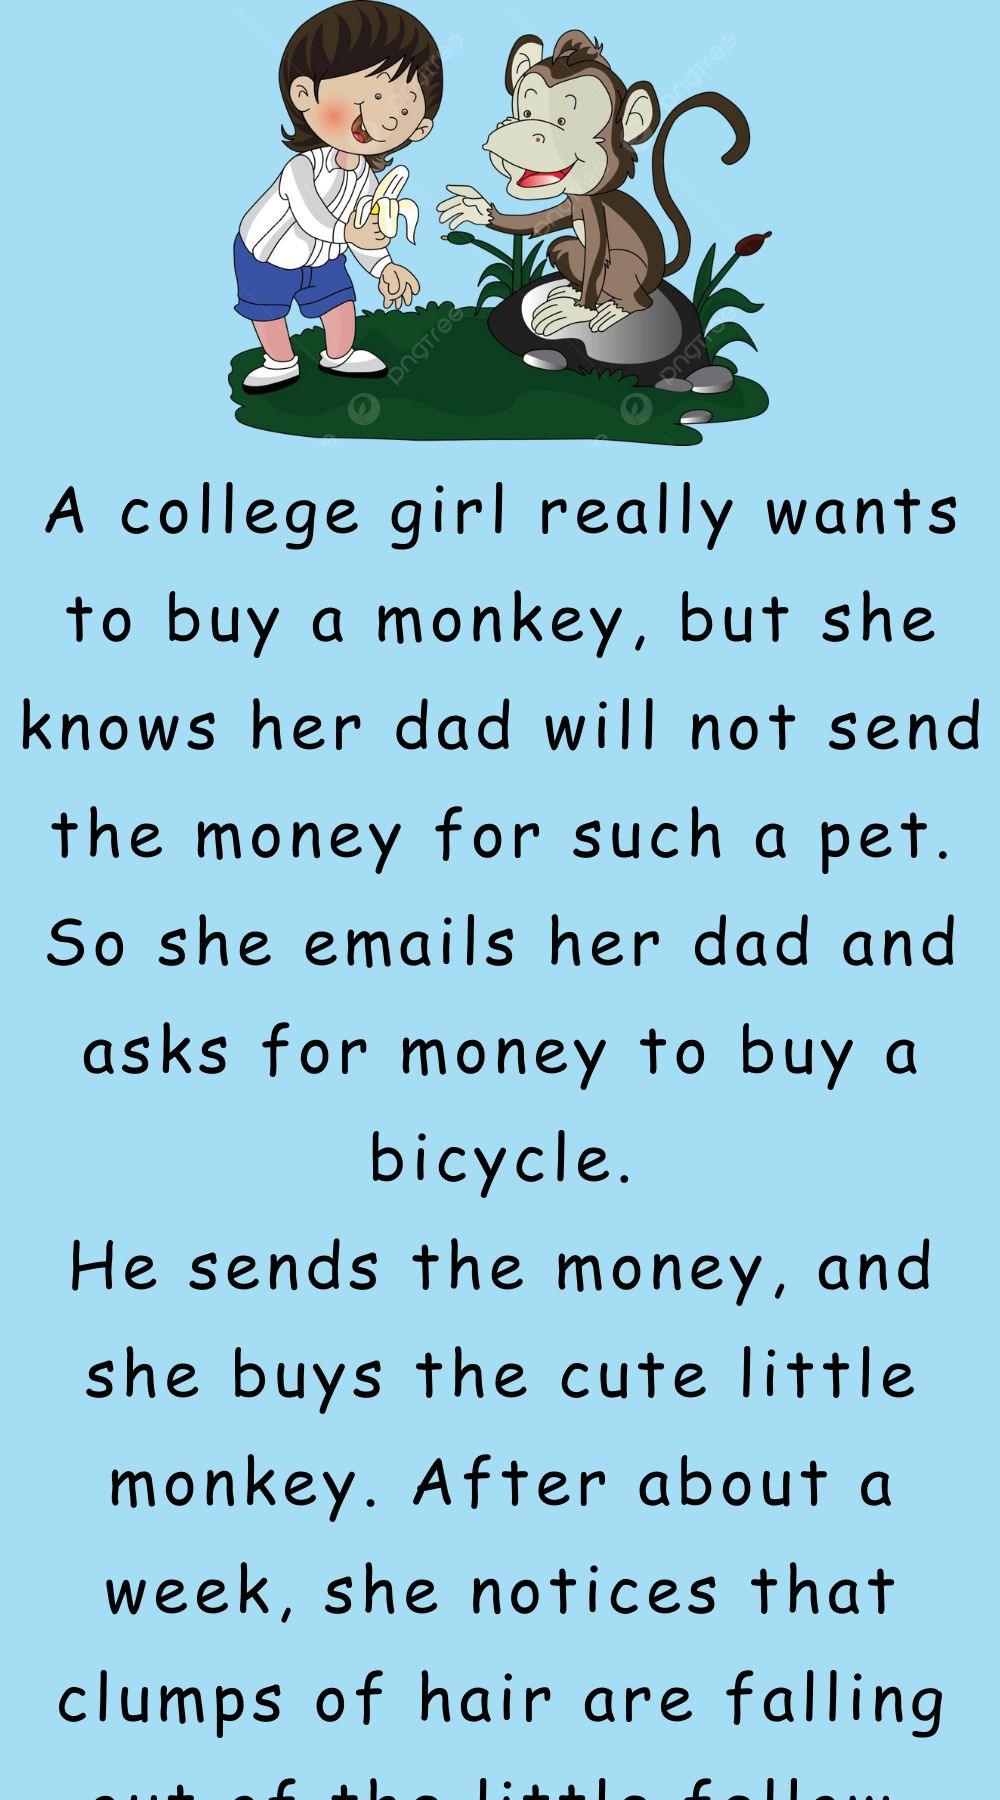 A college girl really wants to buy a monkey